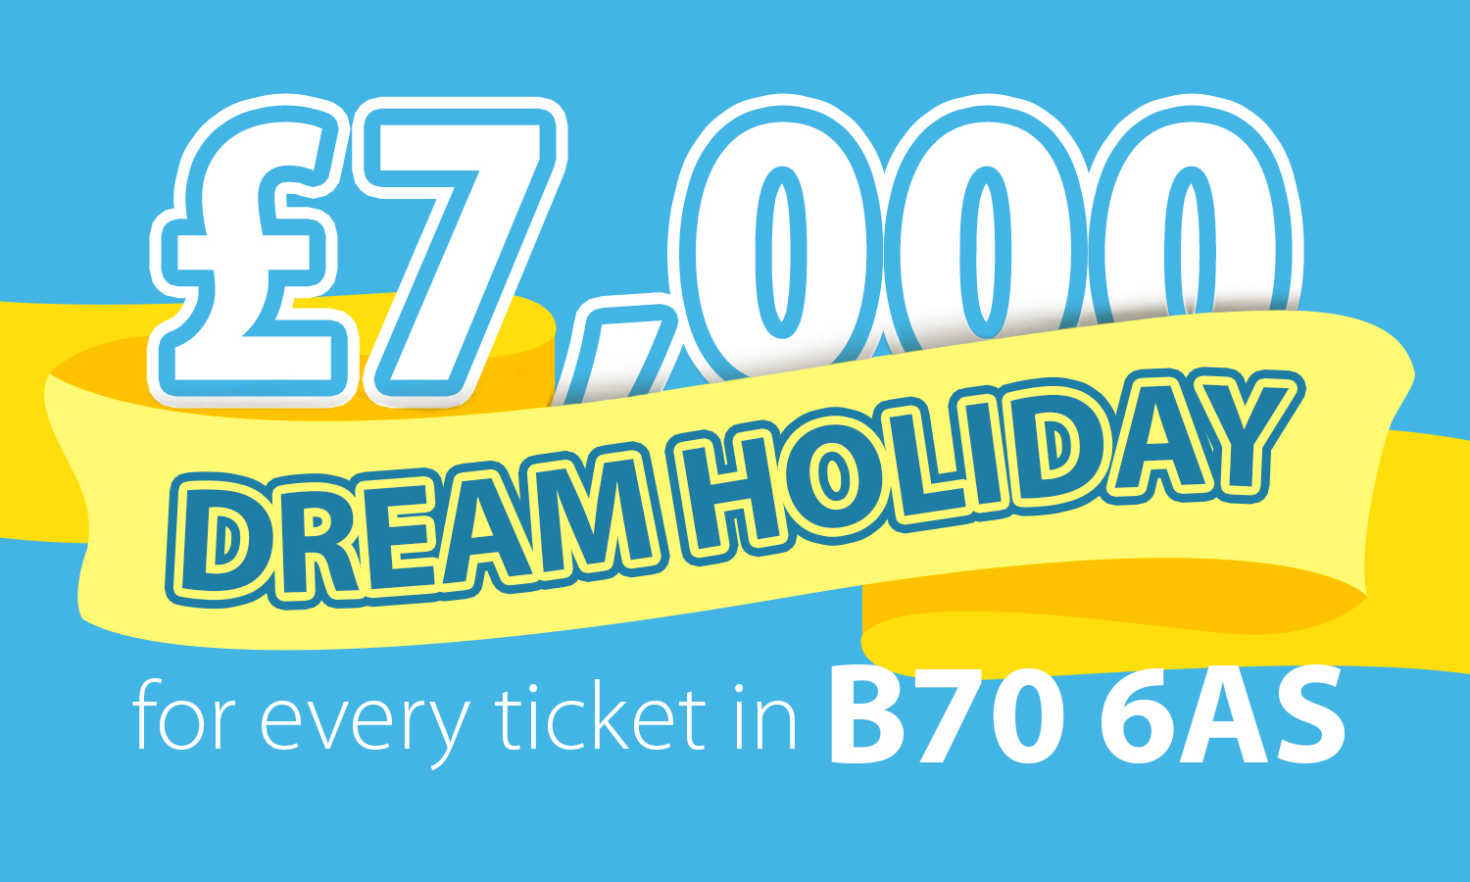 Lucky players in West Bromwich will be jetting off with the Dream Holiday prize